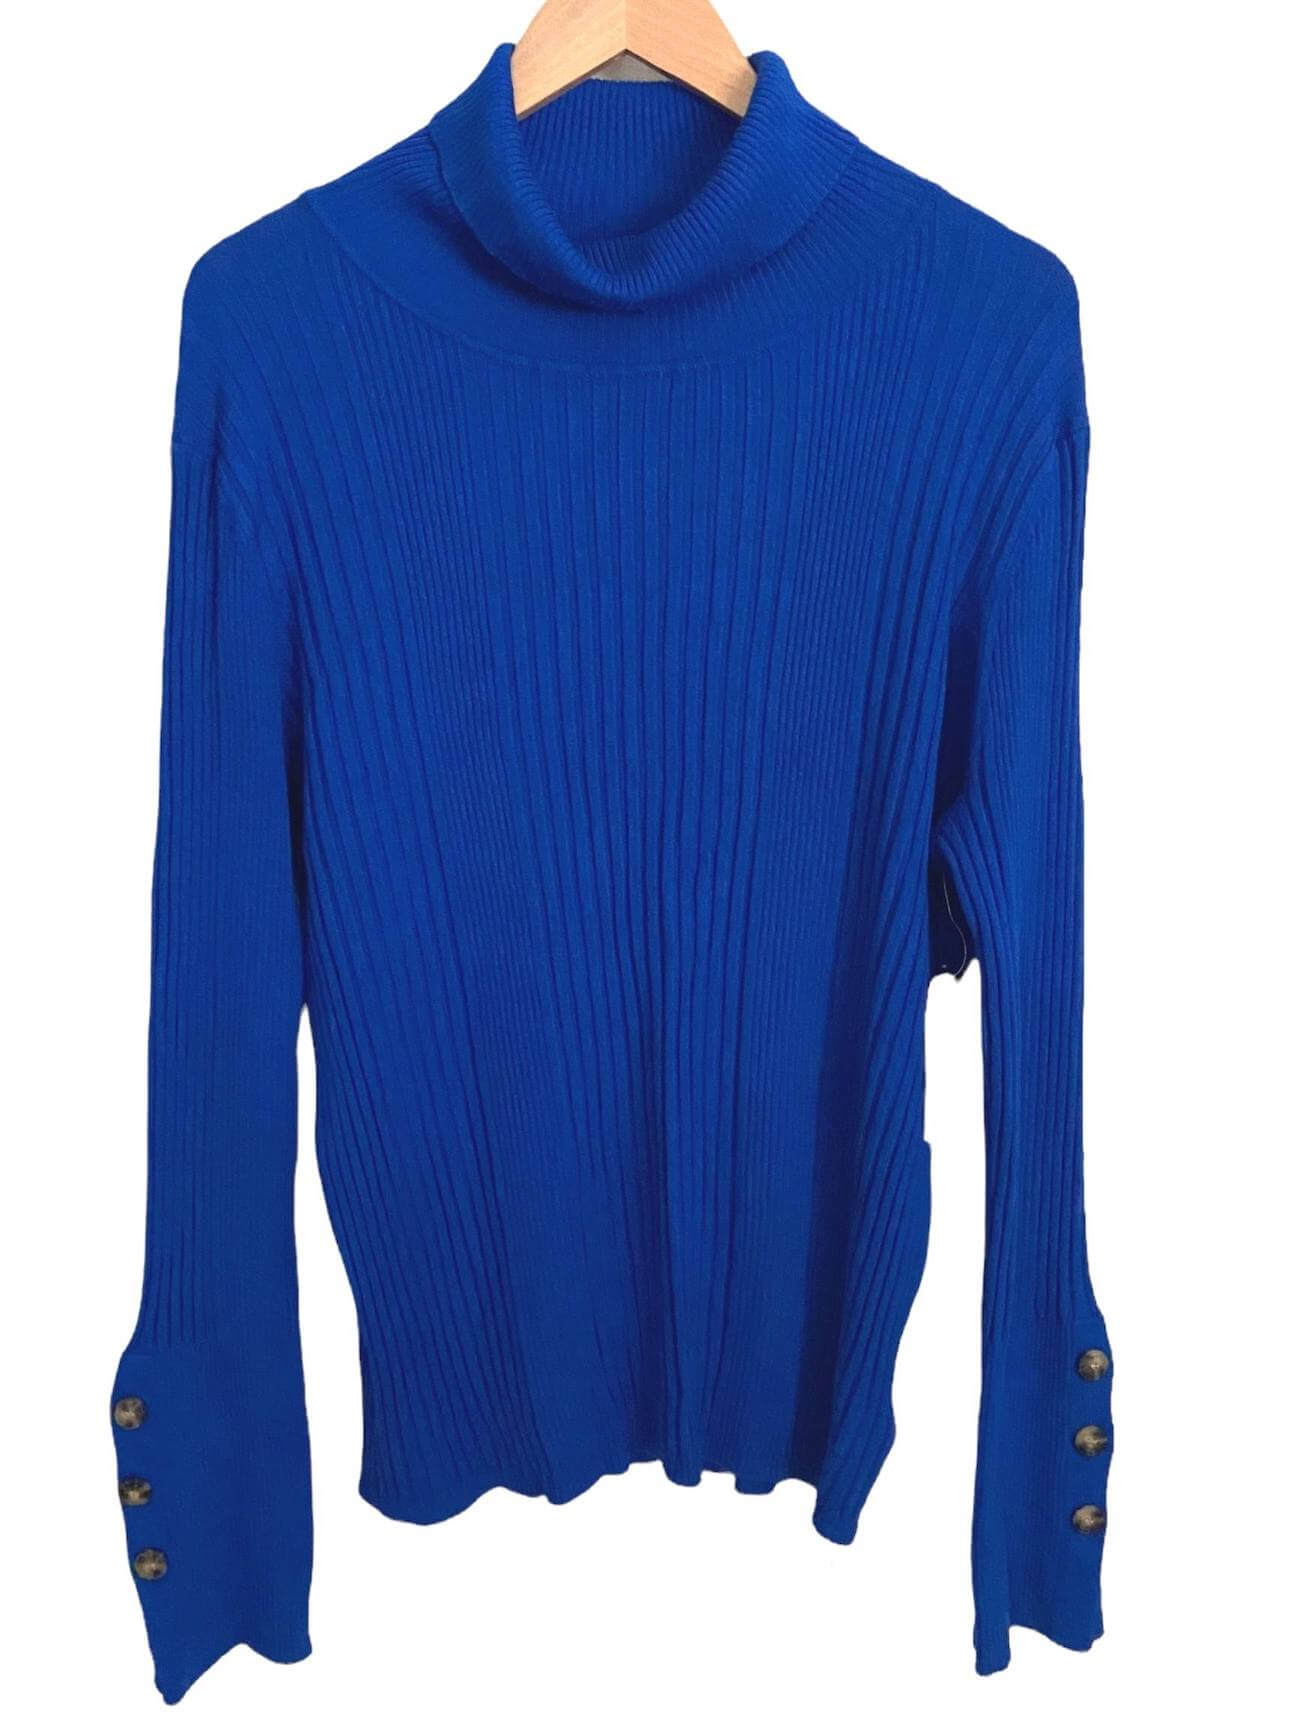 Bright Winter TIME AND TRU ribbed button cuff sweater